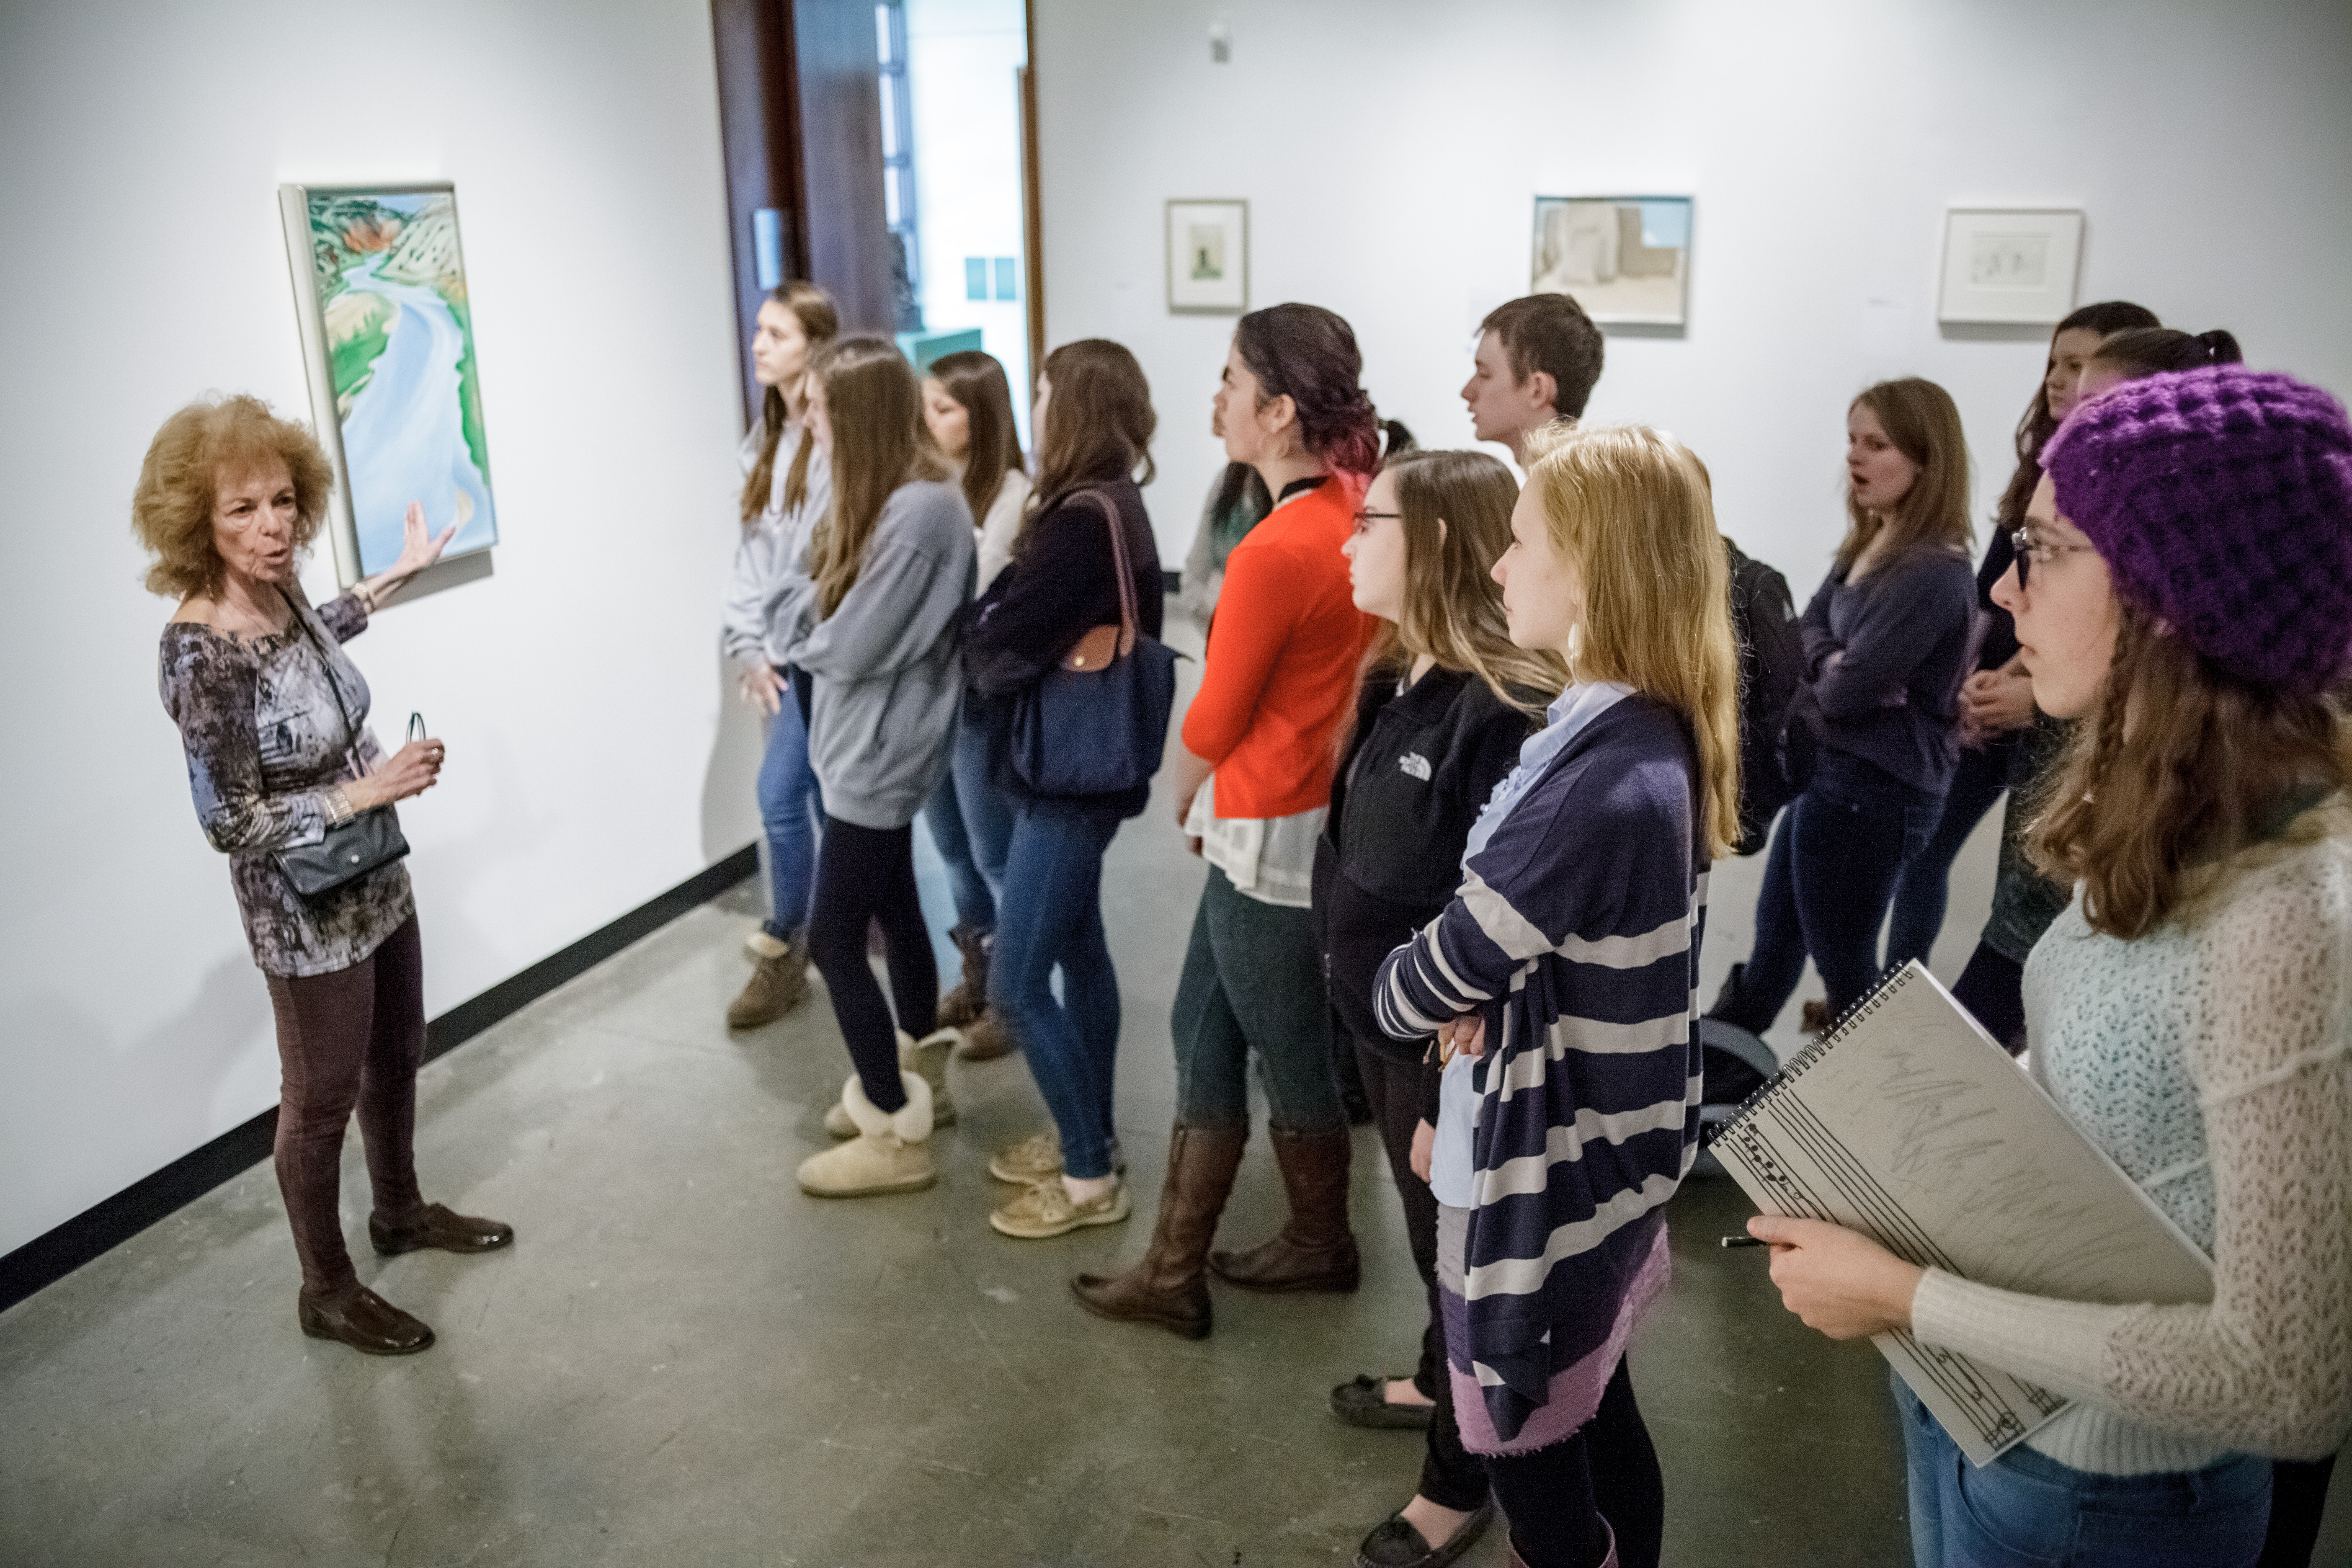 A mam docent is giving a group of high school students a tour in the MAM galleries. The docent is pointing at a painting of a winding road. The students are all very focused on the painting.